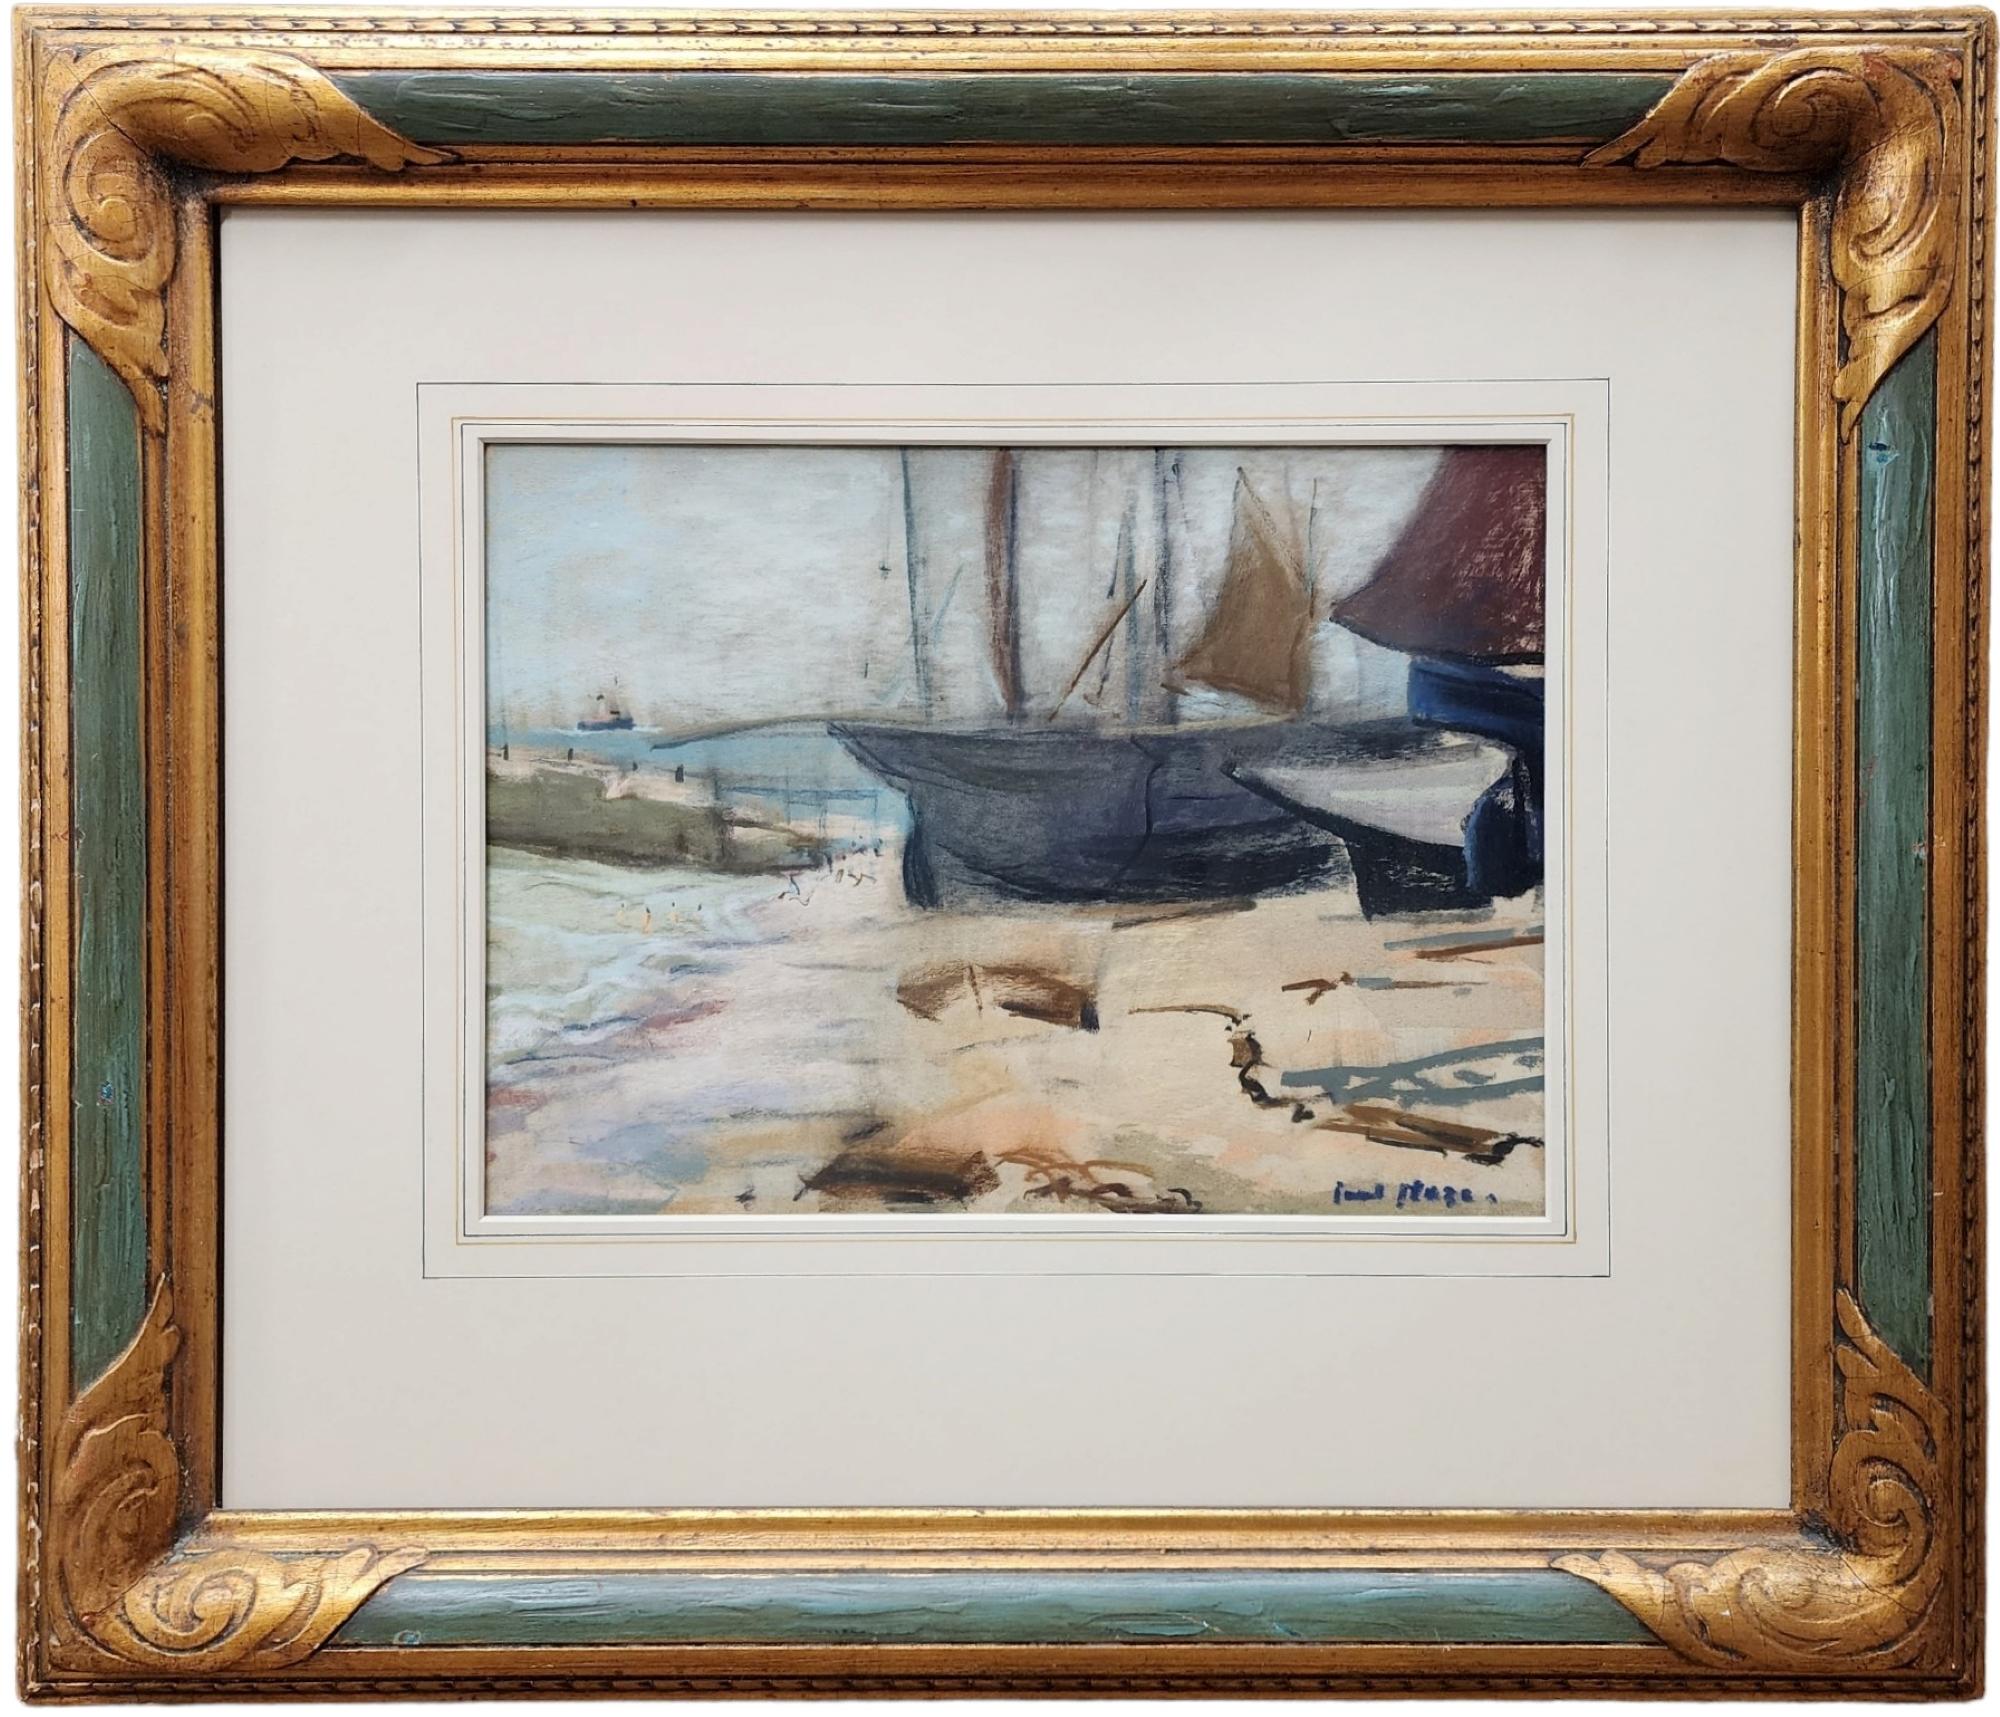 Boats on the Beach, Dorset, Pastel on Paper, Mentor of Winston Churchill - Painting by Paul Lucien Maze 